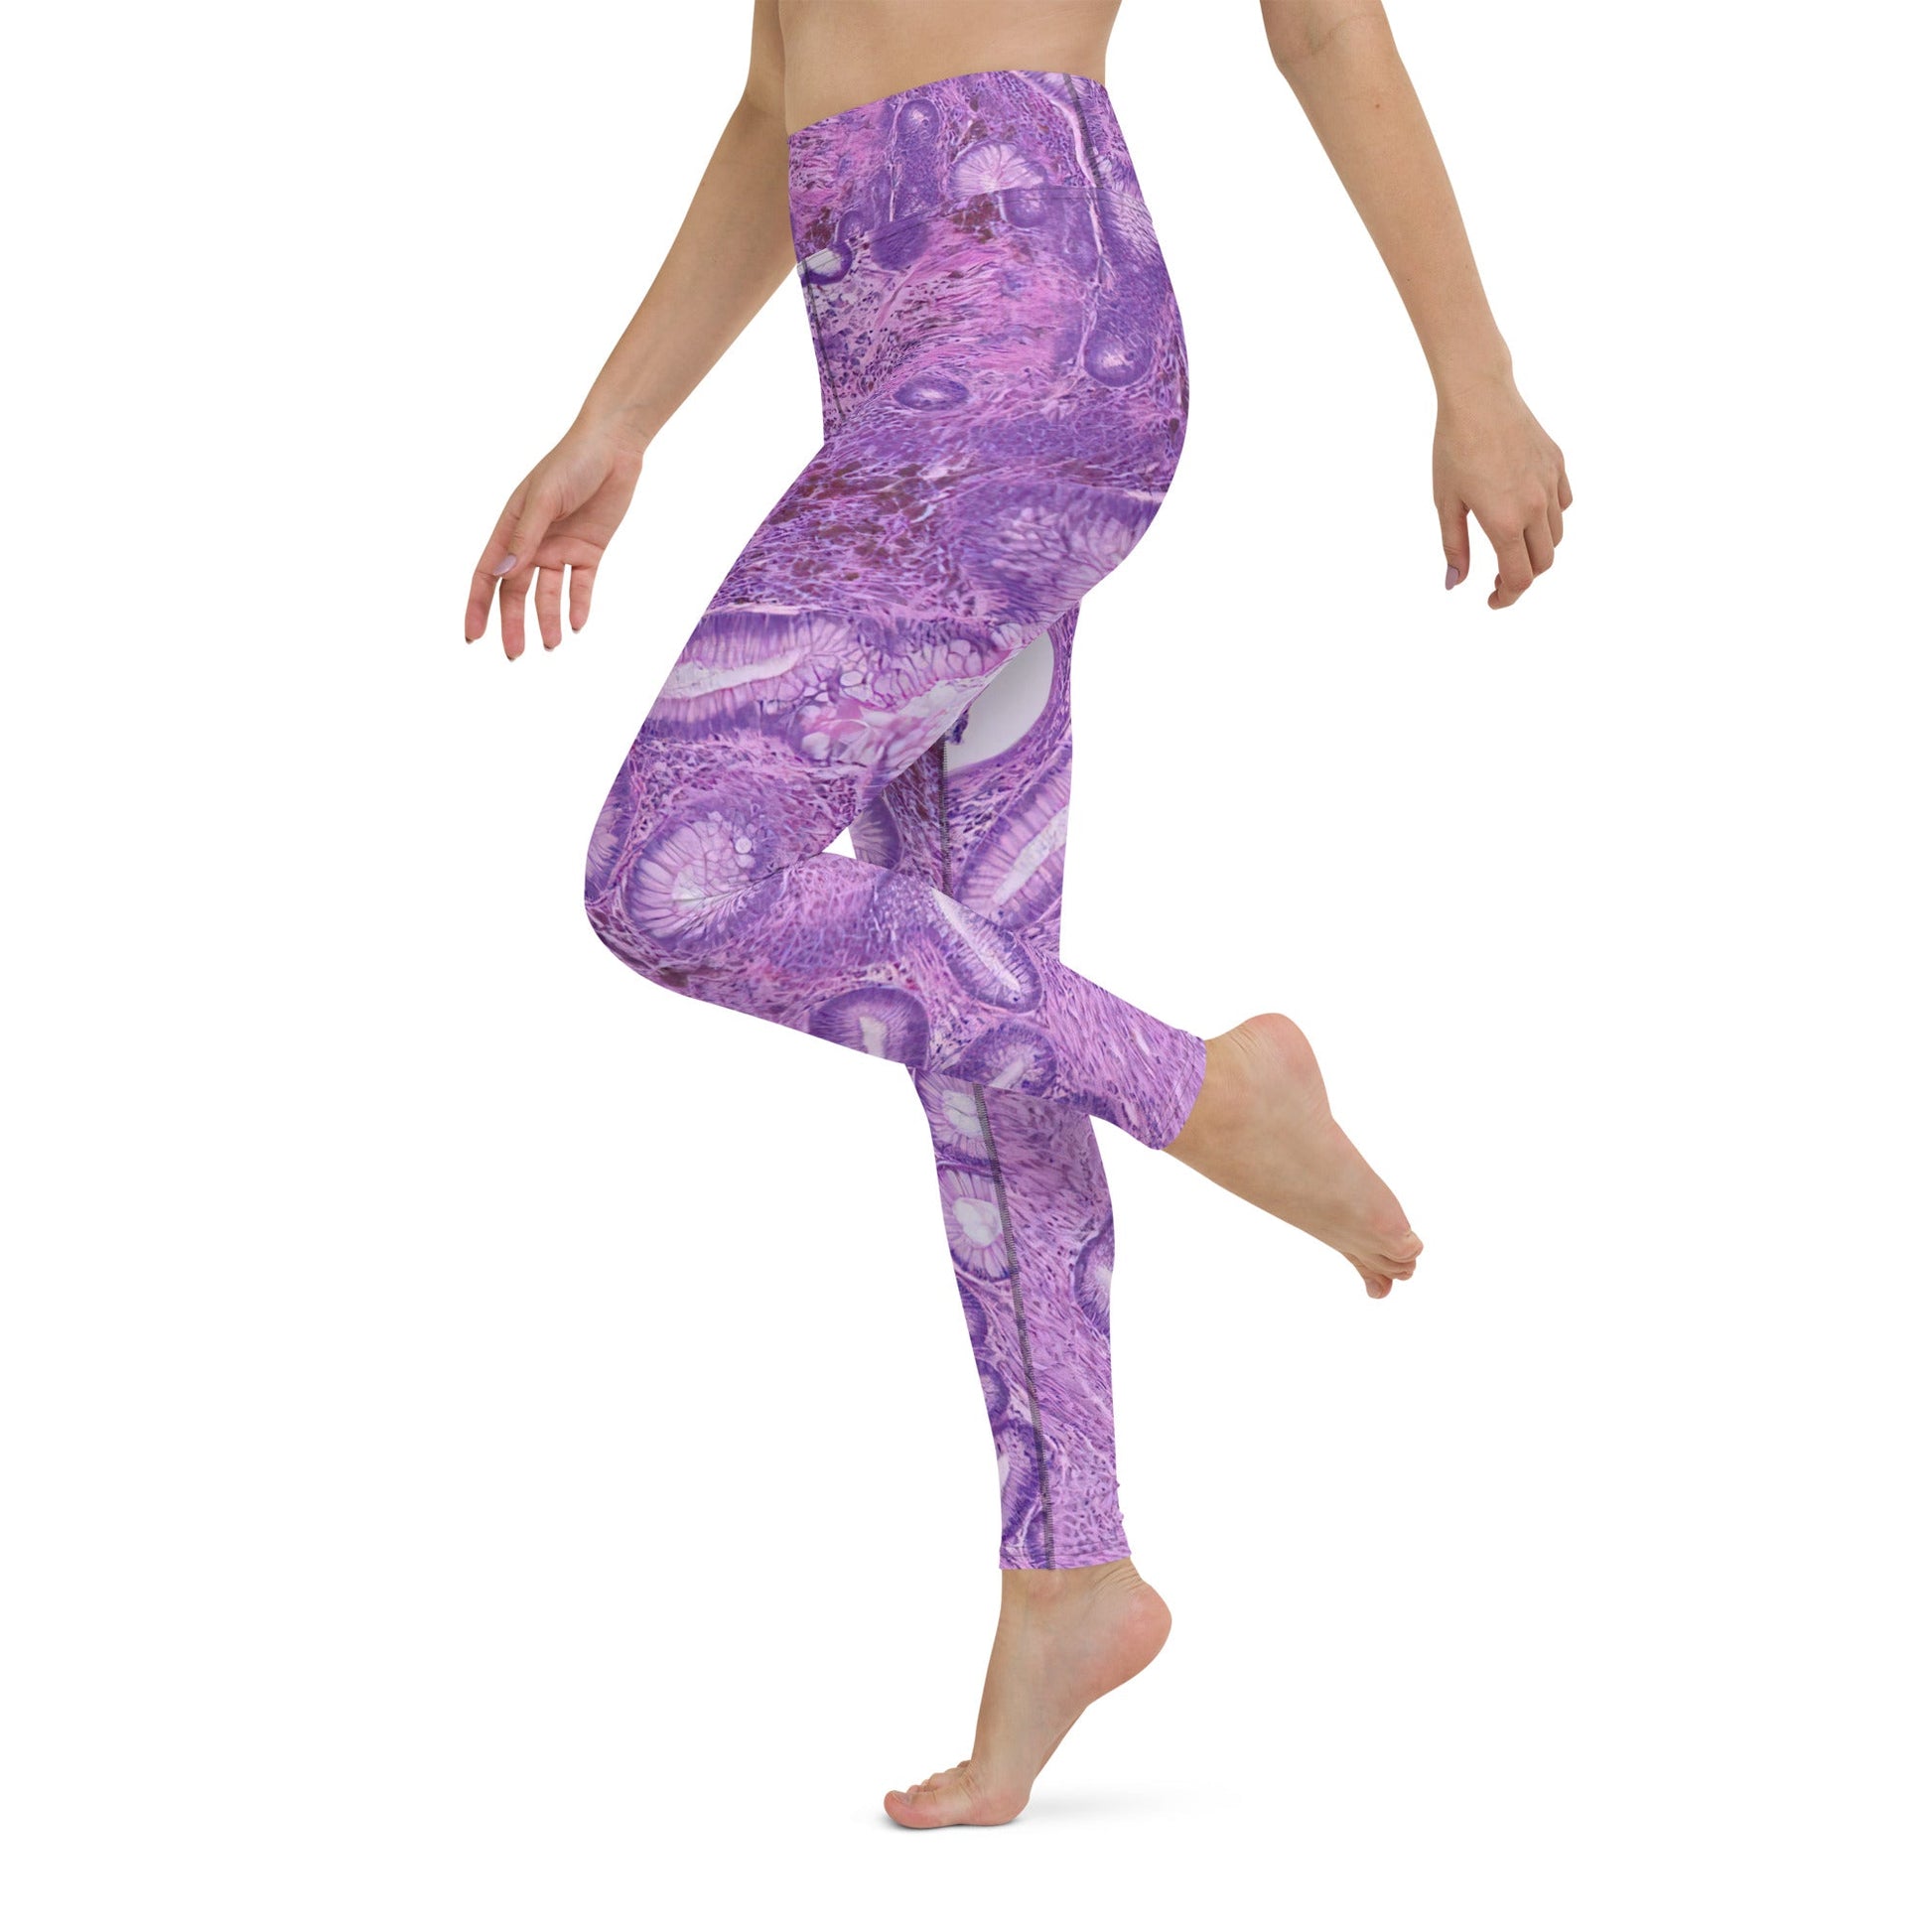 Yoga Pants - "Purple Problem" - Stage Three Breast Cancer - CellWear - #breast cancer awareness# - #medical clothing# - #science# - "medicine#